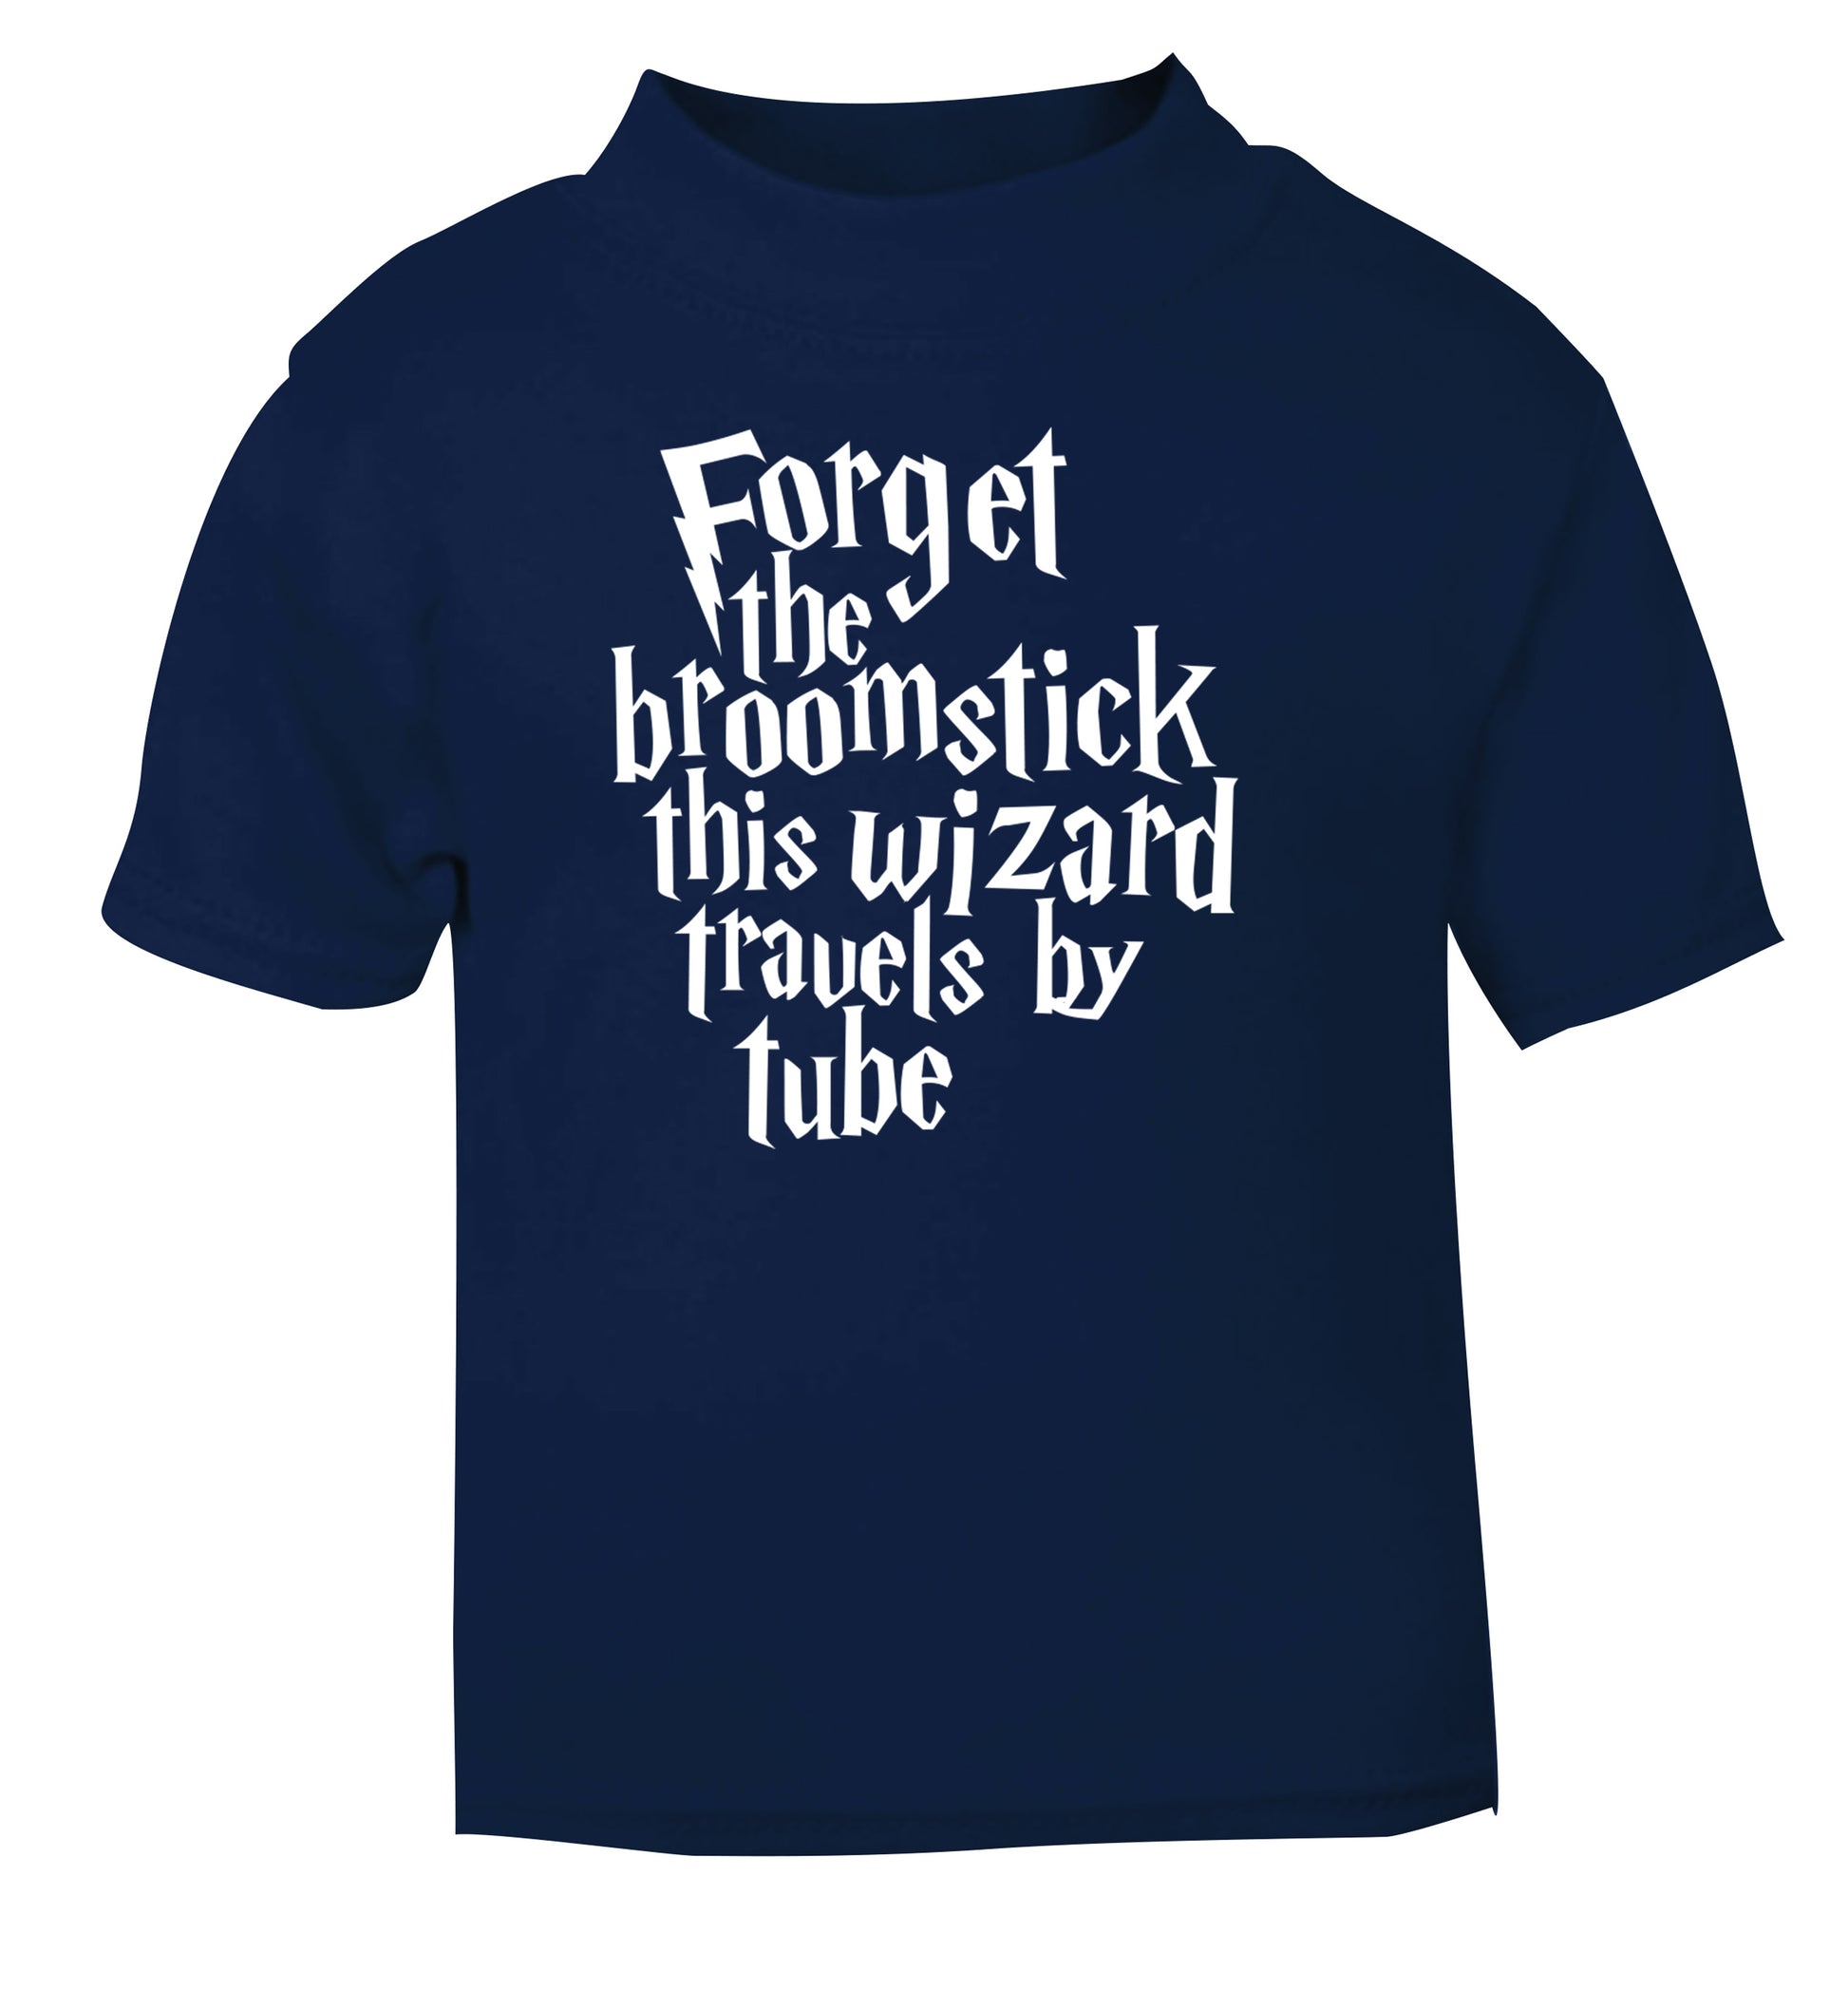 Forget the broomstick this wizard travels by tube navy Baby Toddler Tshirt 2 Years